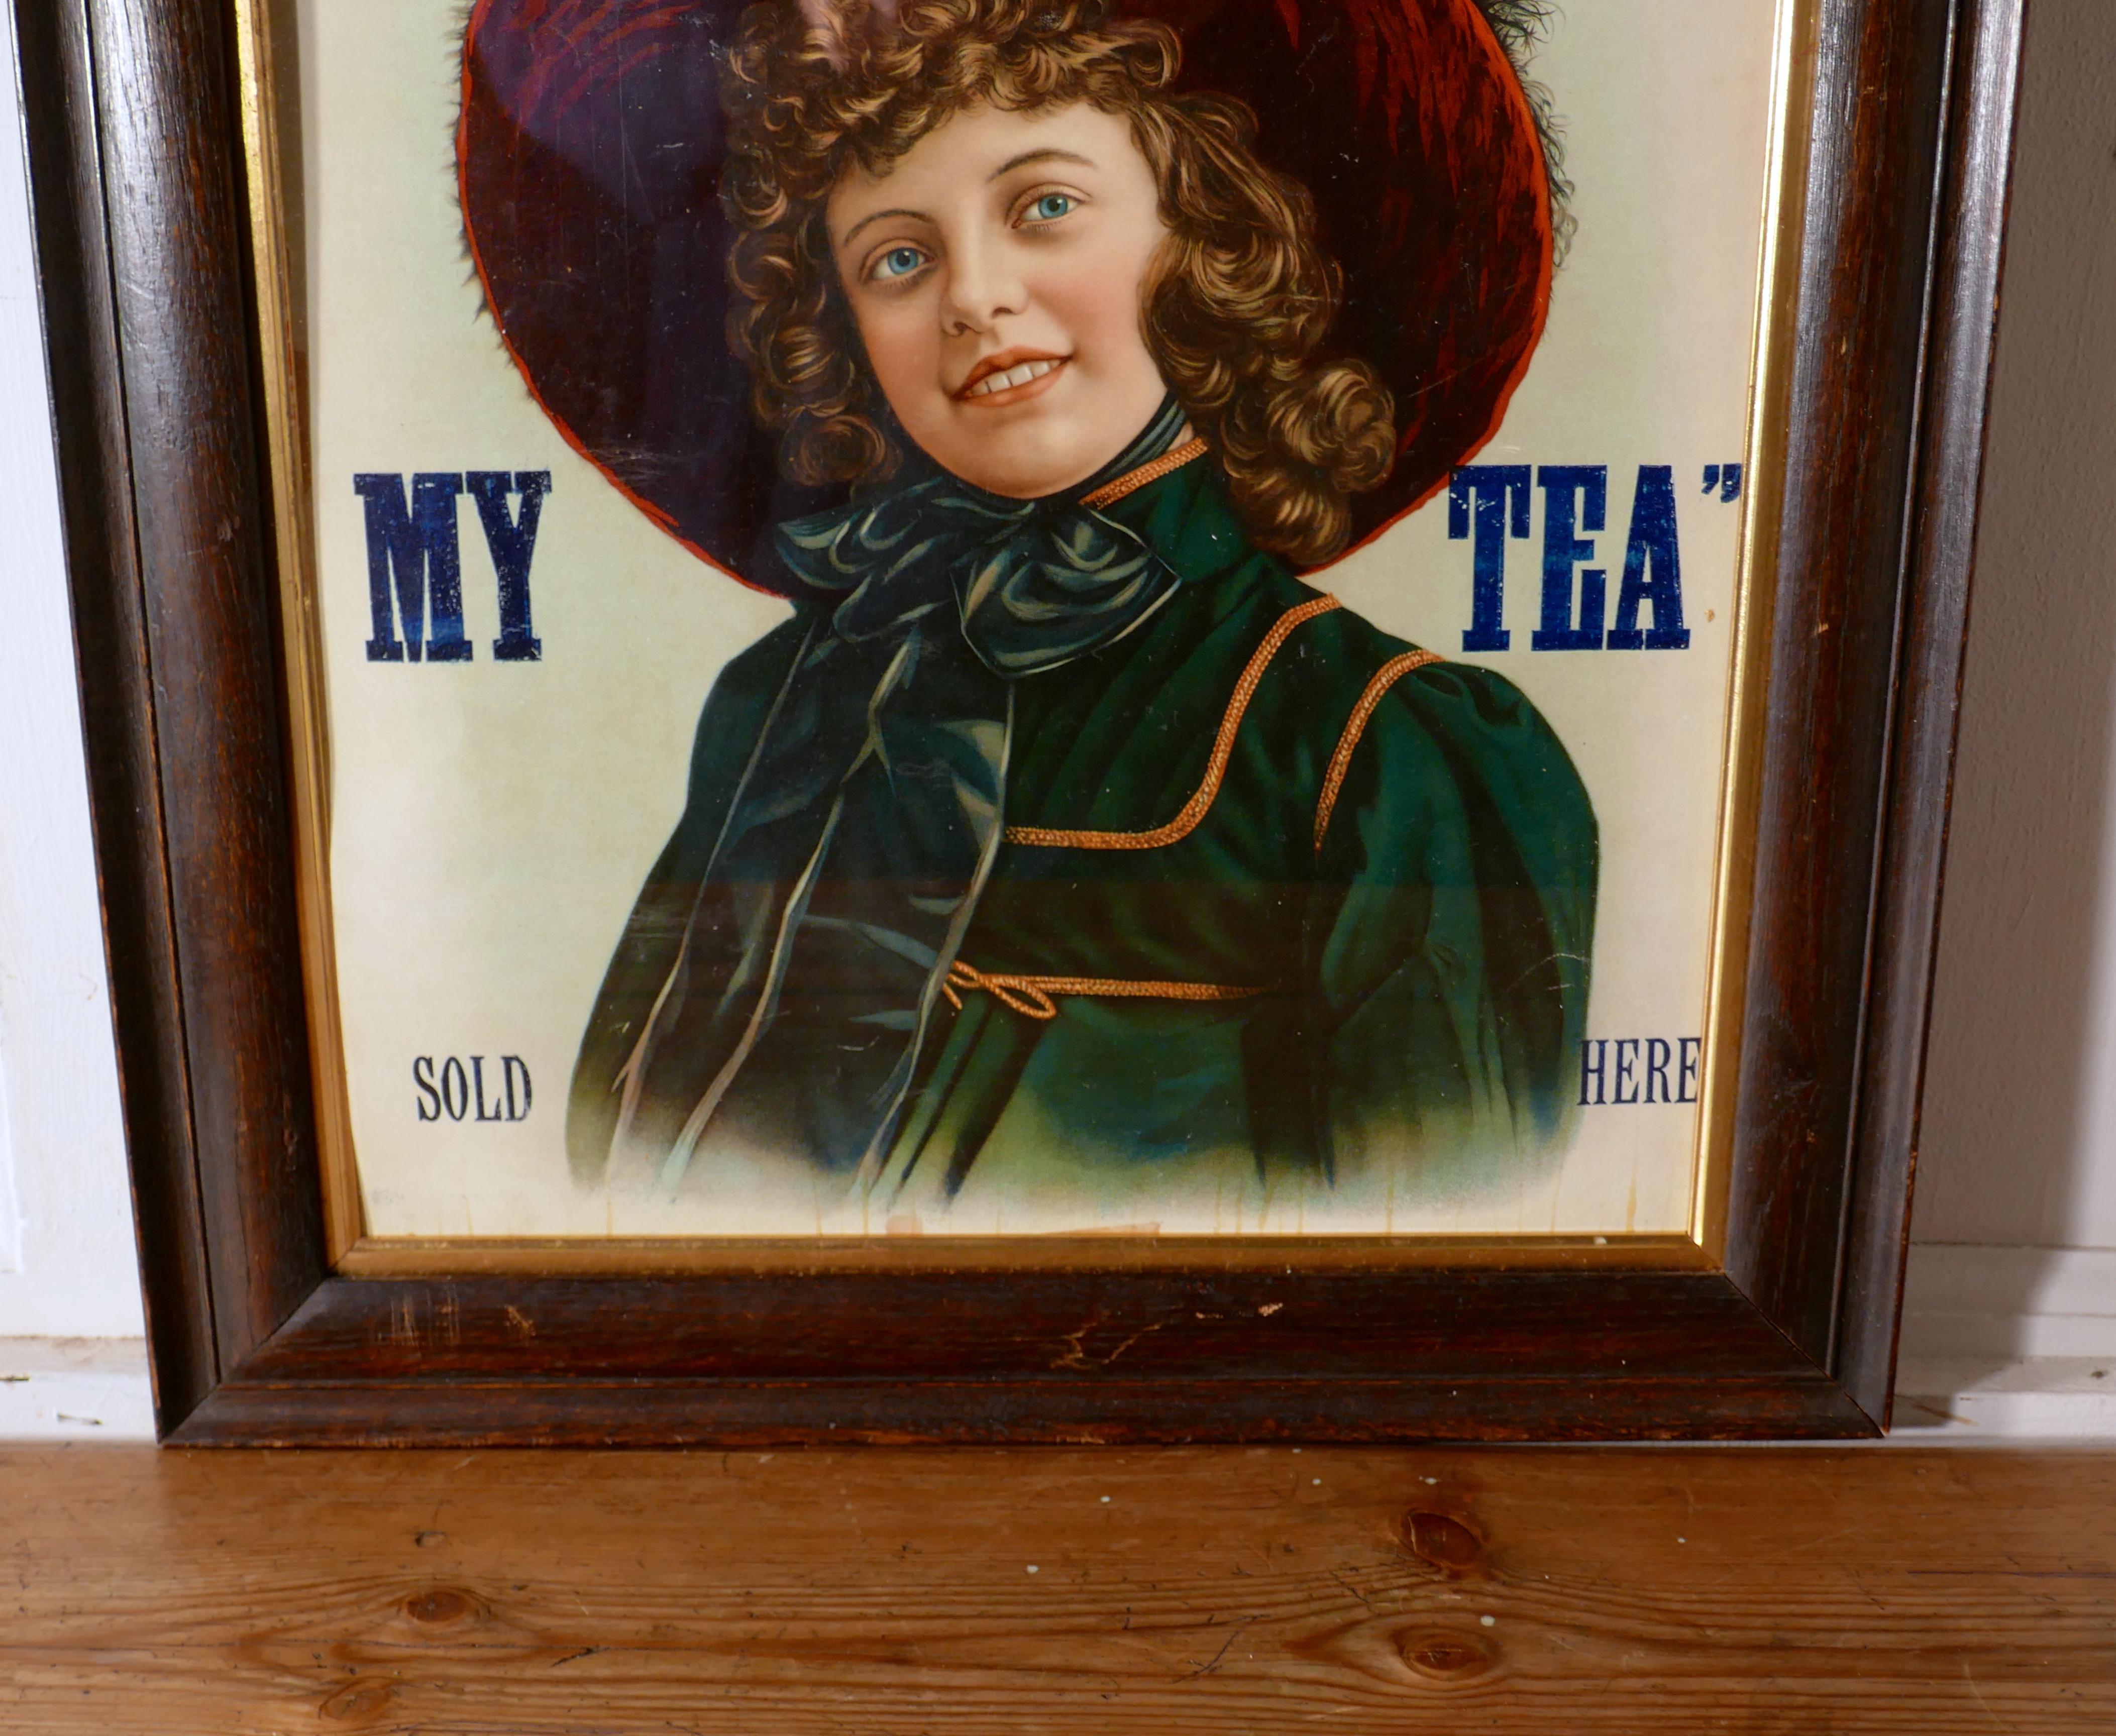 Original Edwardian framed tea advertising card poster, “L.V. TEA IS MY TEA” sold here

This is delightful original advertising sign, showing a happy young lady in period winter costume
The sign is color printed on card, it is in good condition